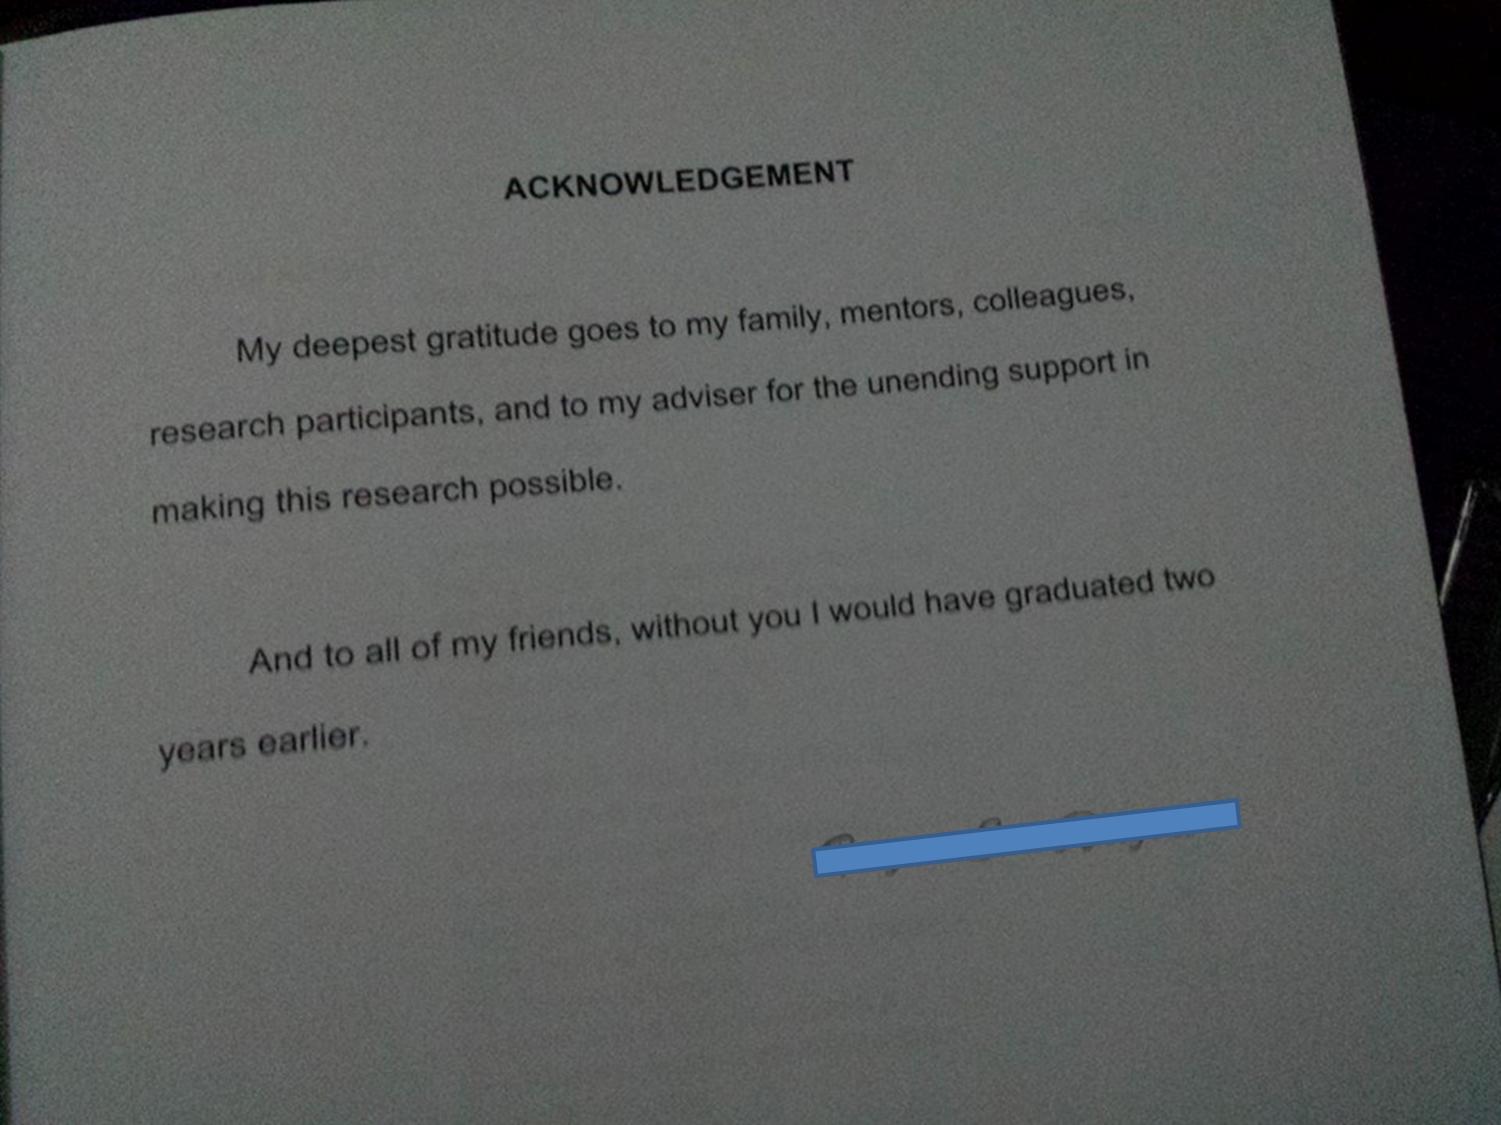 A friend just finished printing his research manuscript. He acknowledged us so well.